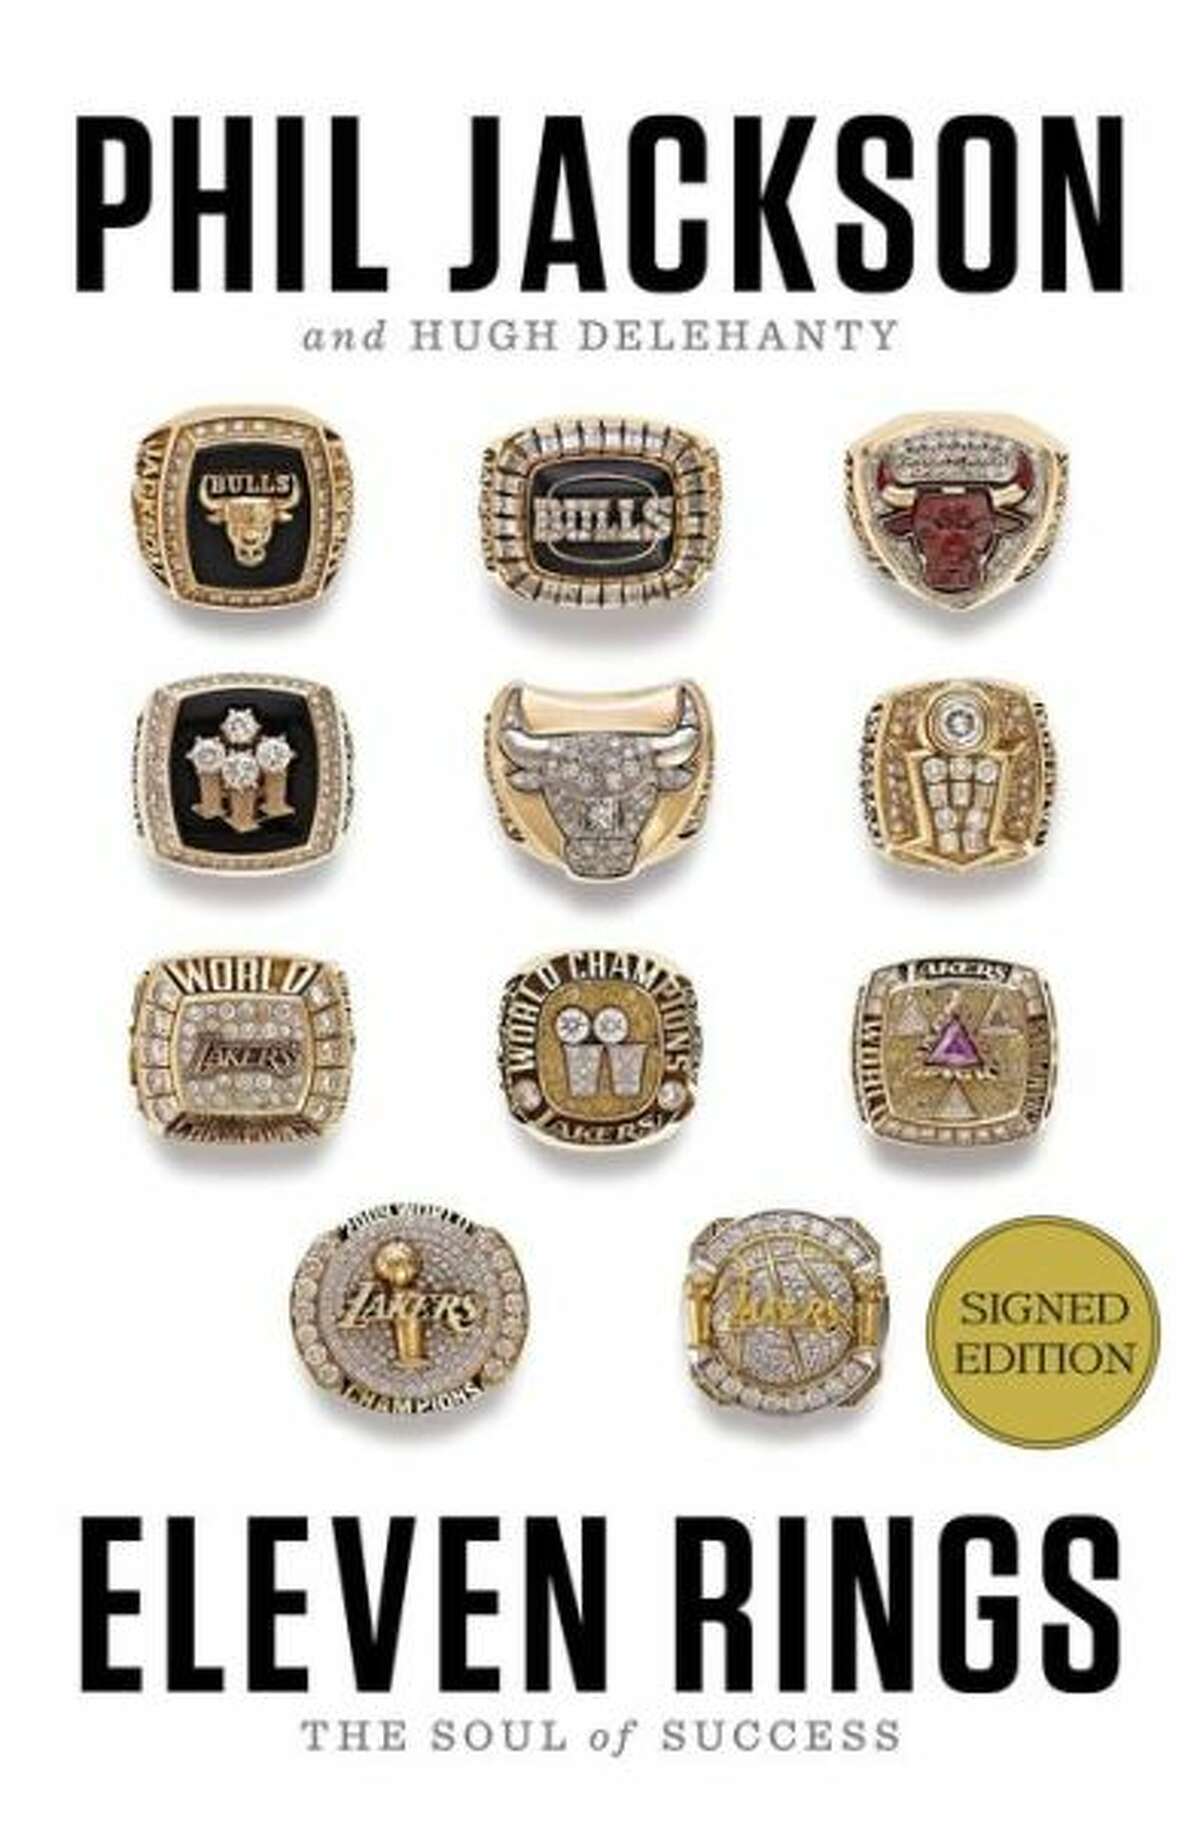 BOOK JACKET - "Eleven Rings" by Phil Jackson with Hugh Delehanty